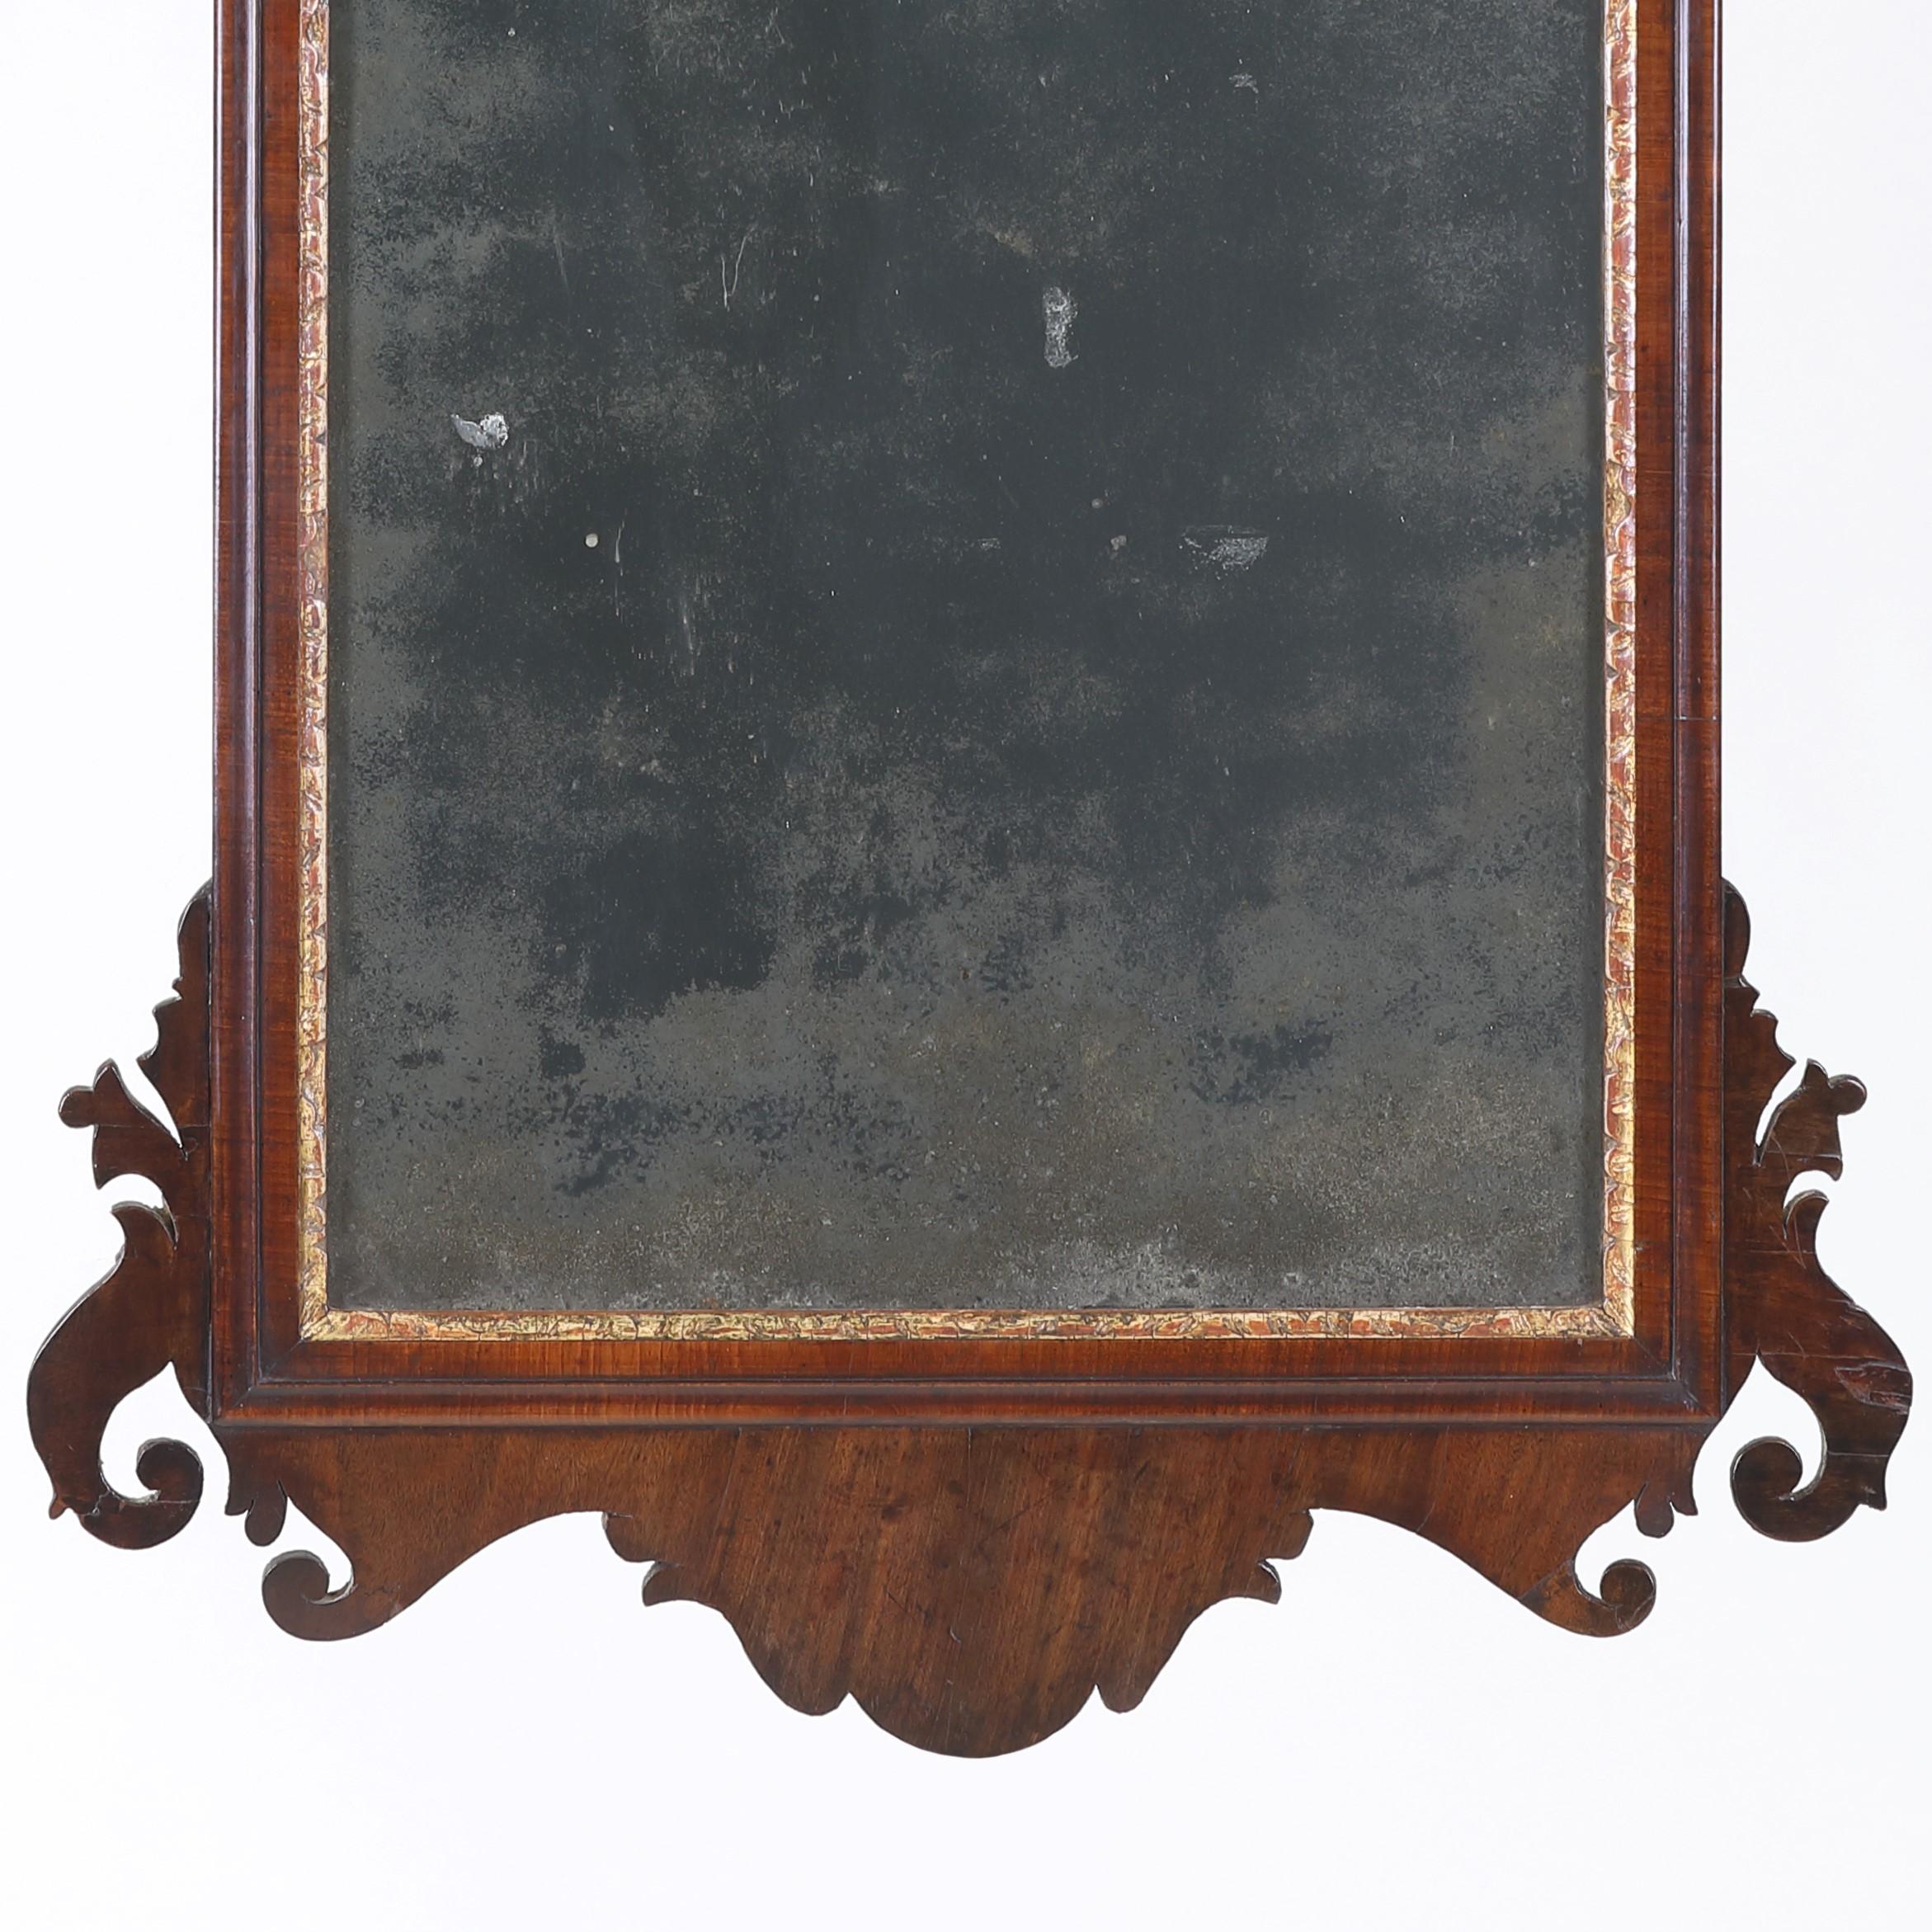 A fine mid-18th century fret-cut mahogany wall mirror with gilded Ho-ho bird crest and gilded sight edge. Retaining its' original distressed mirror plate with has a particularly pleasing tone and sparkle only found in 250 year-old glass.